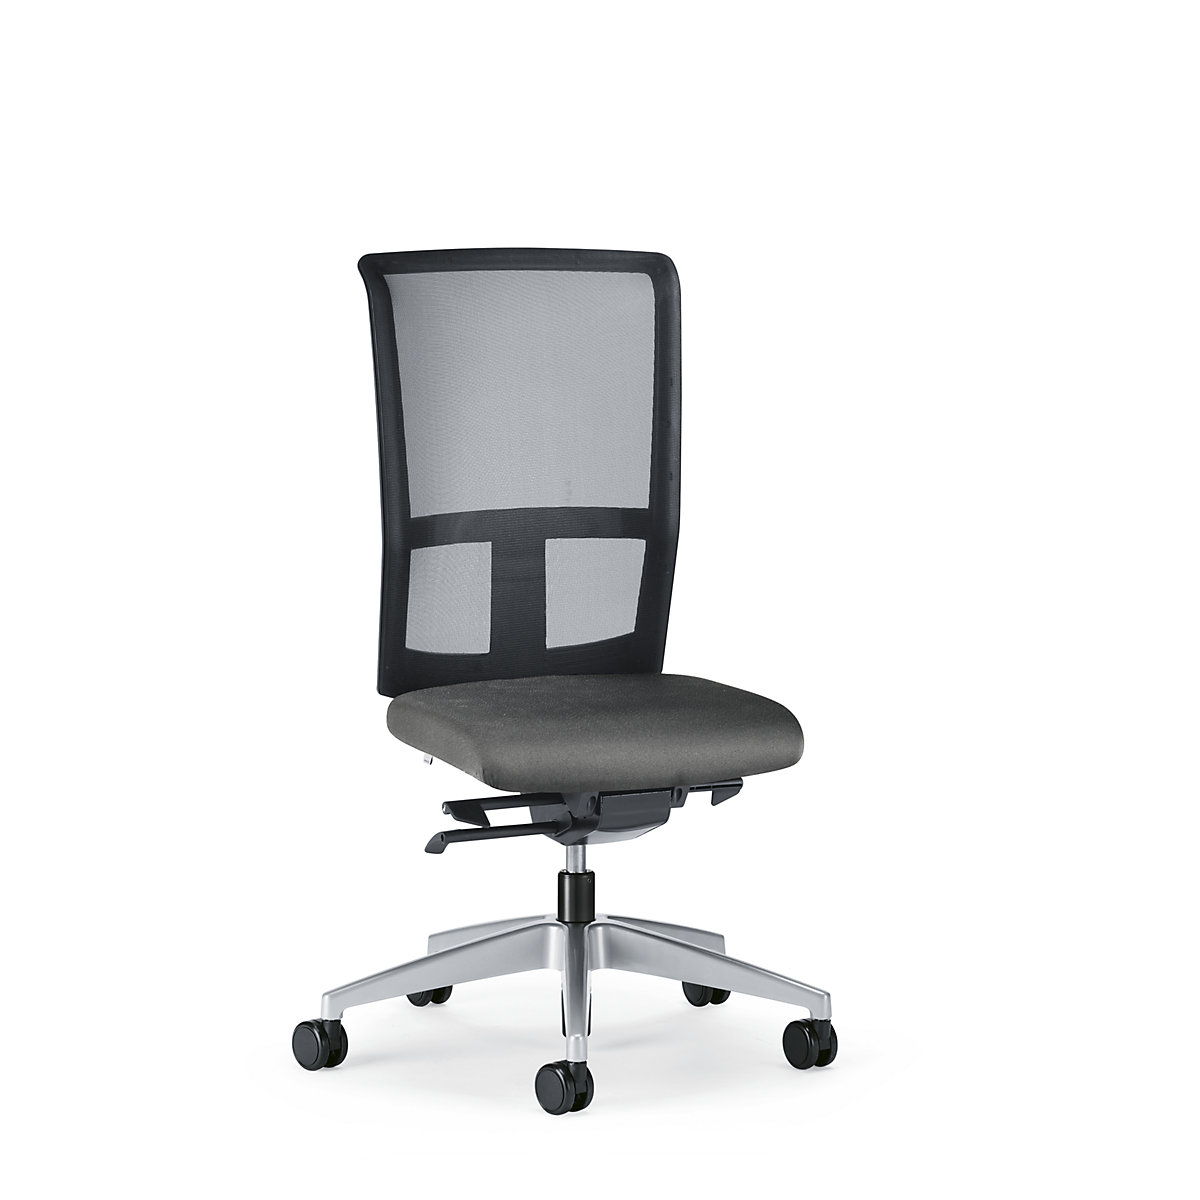 GOAL AIR office swivel chair, back rest height 545 mm – interstuhl, brilliant silver frame, with soft castors, iron grey, seat depth 410 mm-3